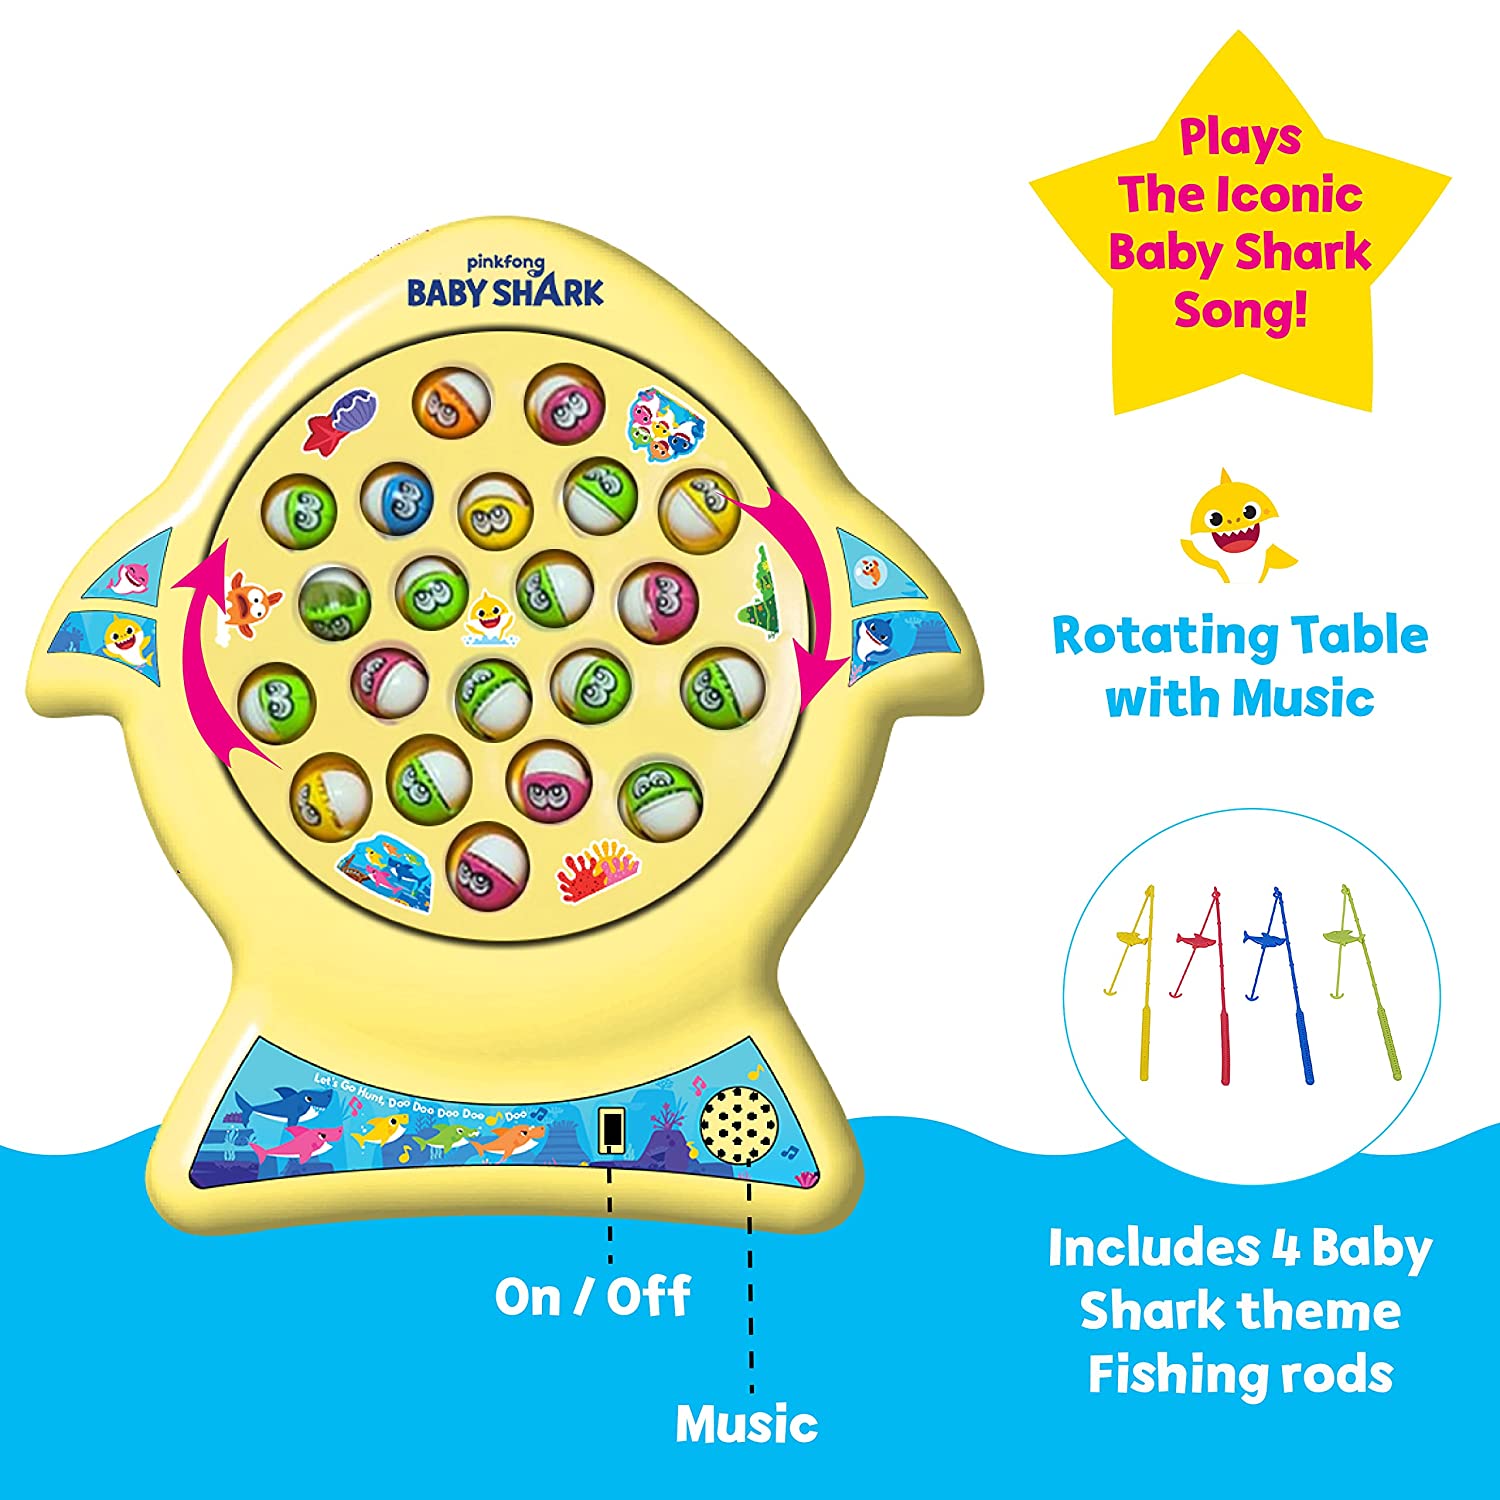 Pinkfong Baby Shark Let's Go Hunt Fishing Game - Play the Baby Shark Song:  : Toys